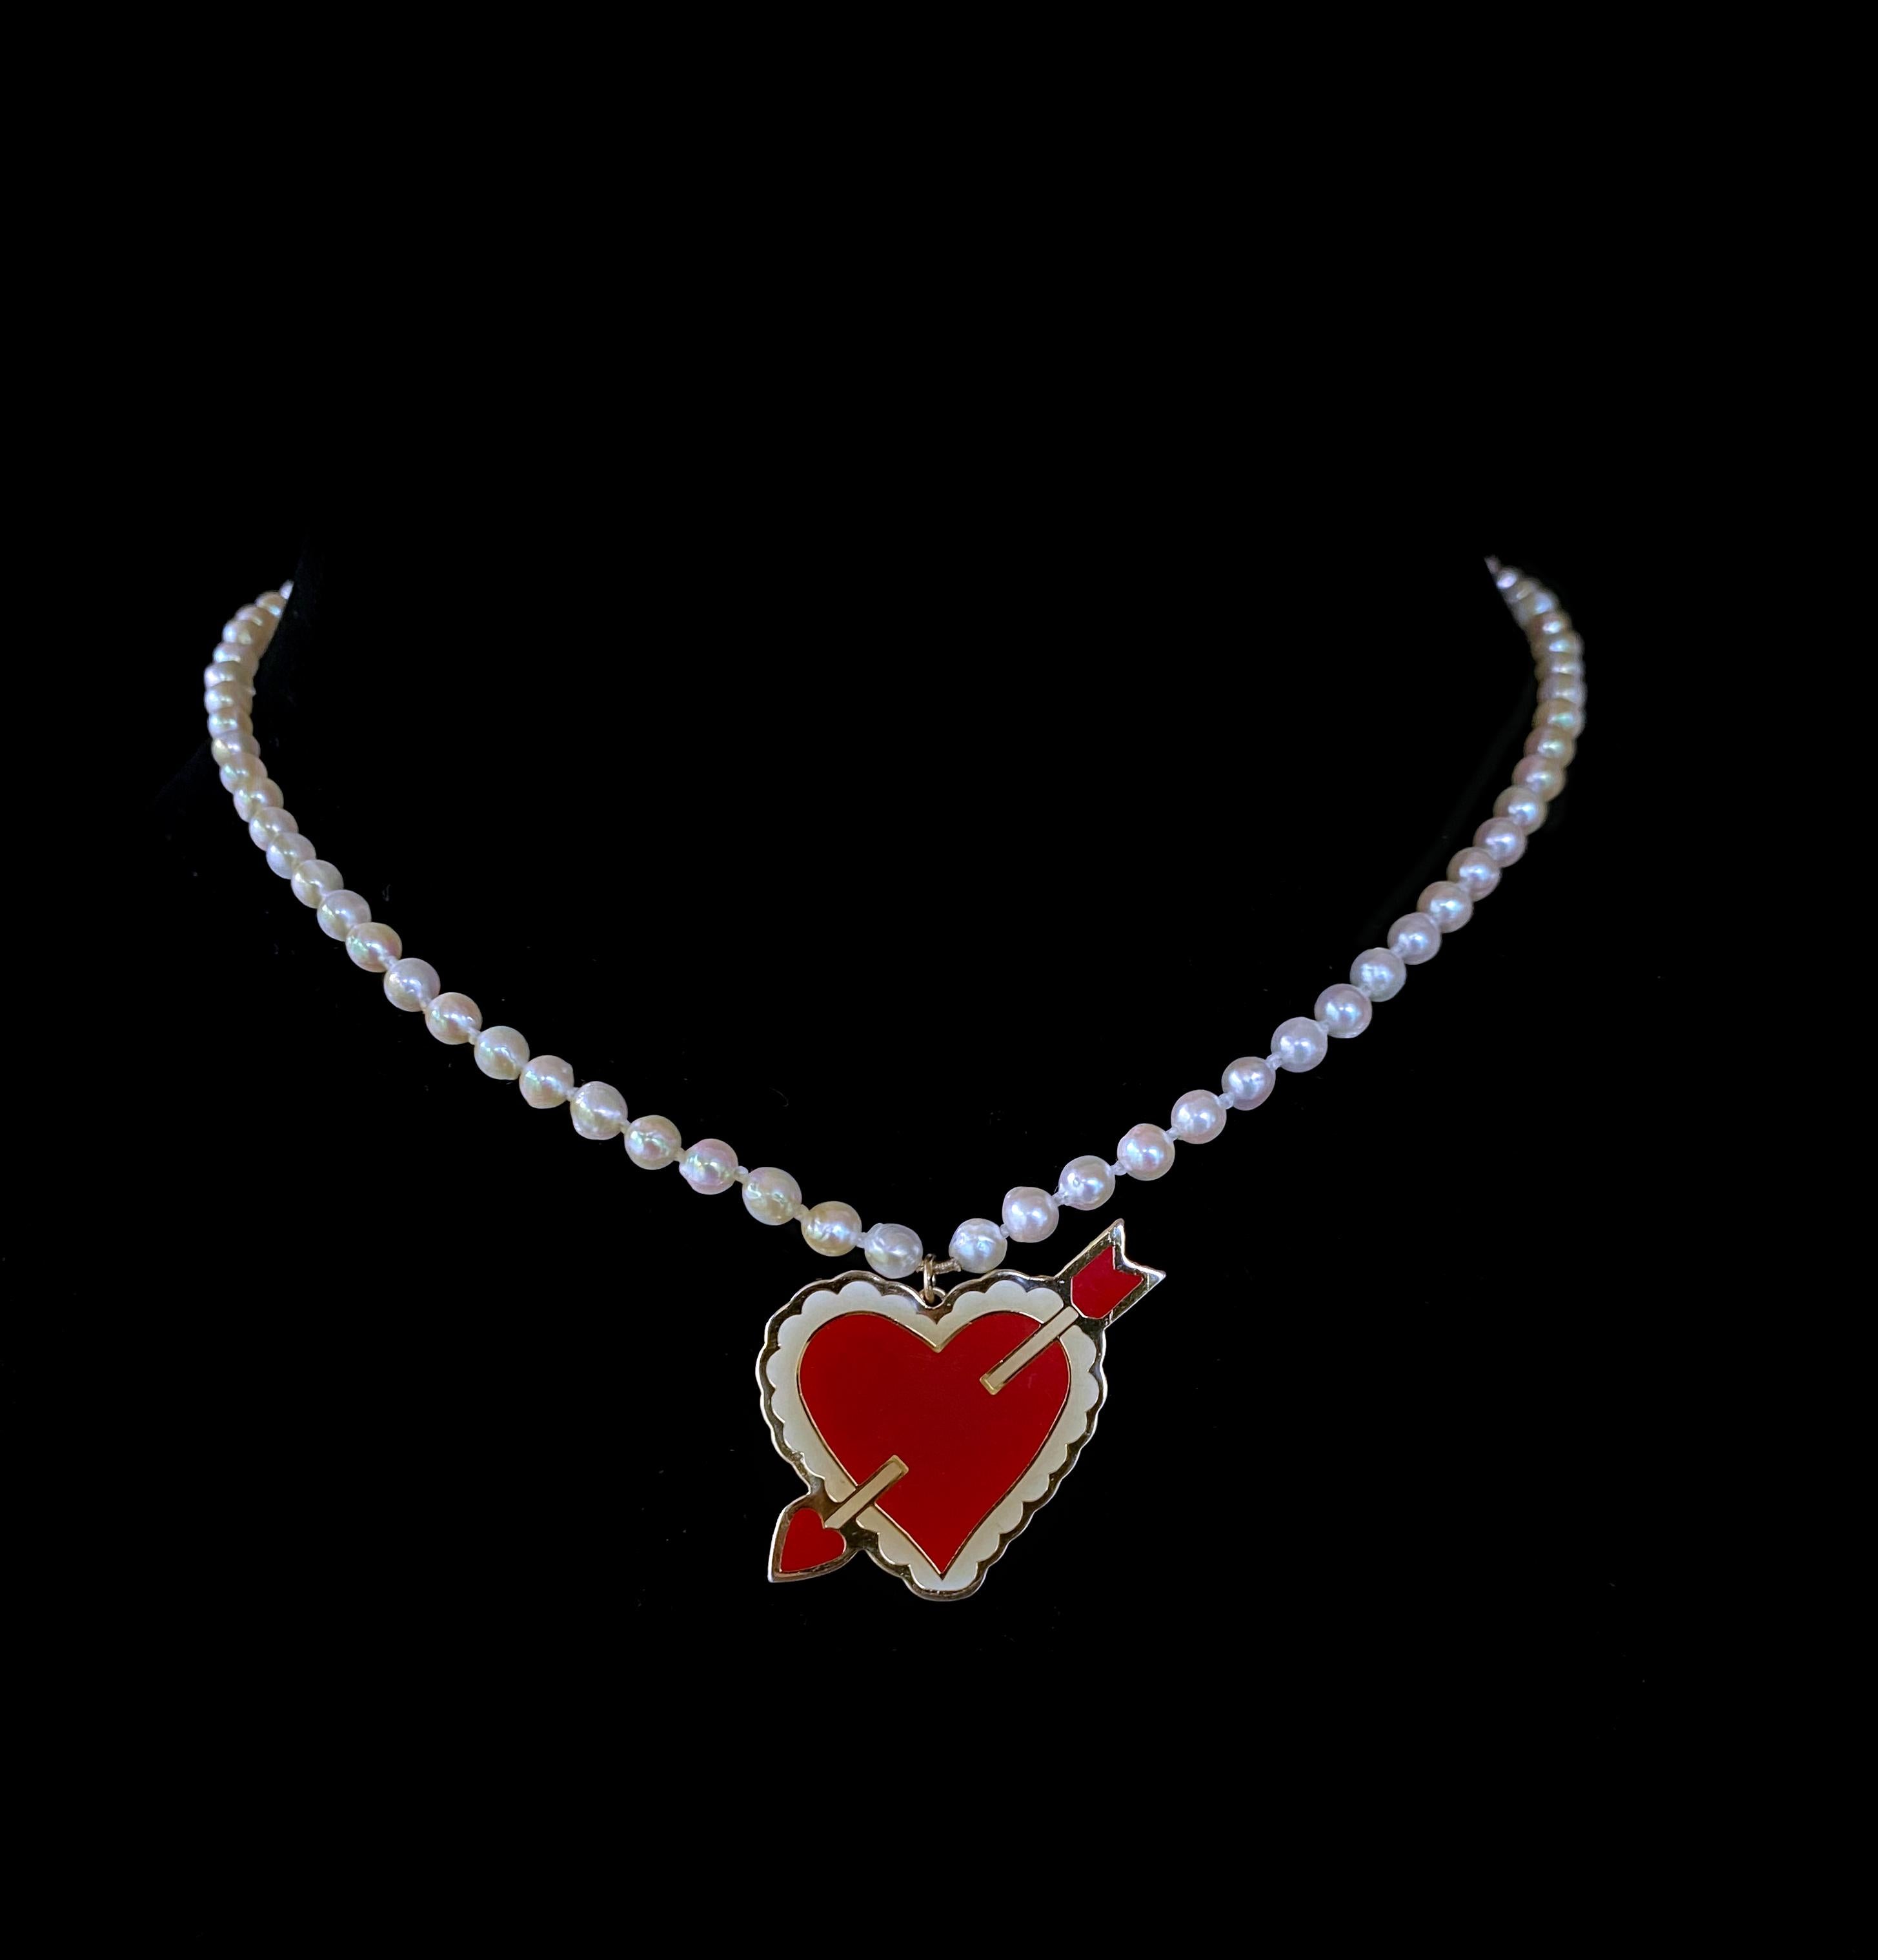 Simple and playful necklace by Marina J. This necklace features a Vintage Valentines high shine Enamel Pendant displaying a Decorative heart with a bow through it. This Pendant has been incorporated into a small Cultured Pearl strung necklace,